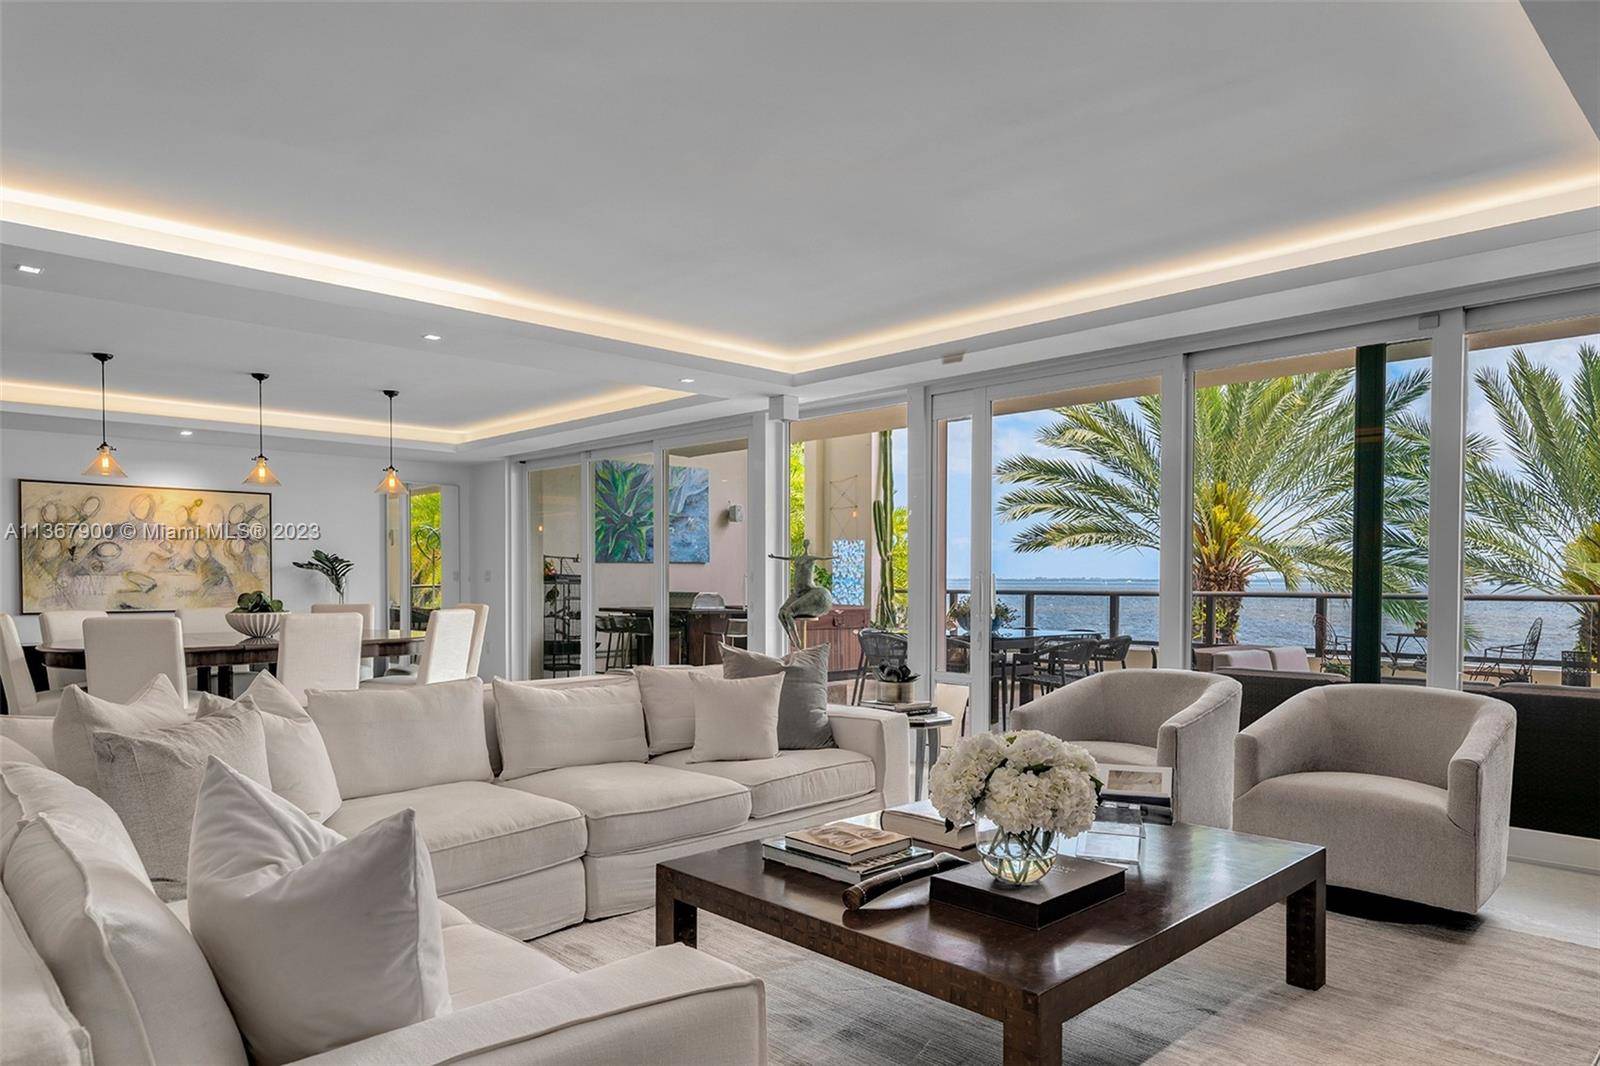 Welcome inside this Waterfront 2 sory apartment boasting 3 beds, 5 ½ bath den, located in Coconut Grove inside the private Residences of Vizcaya.